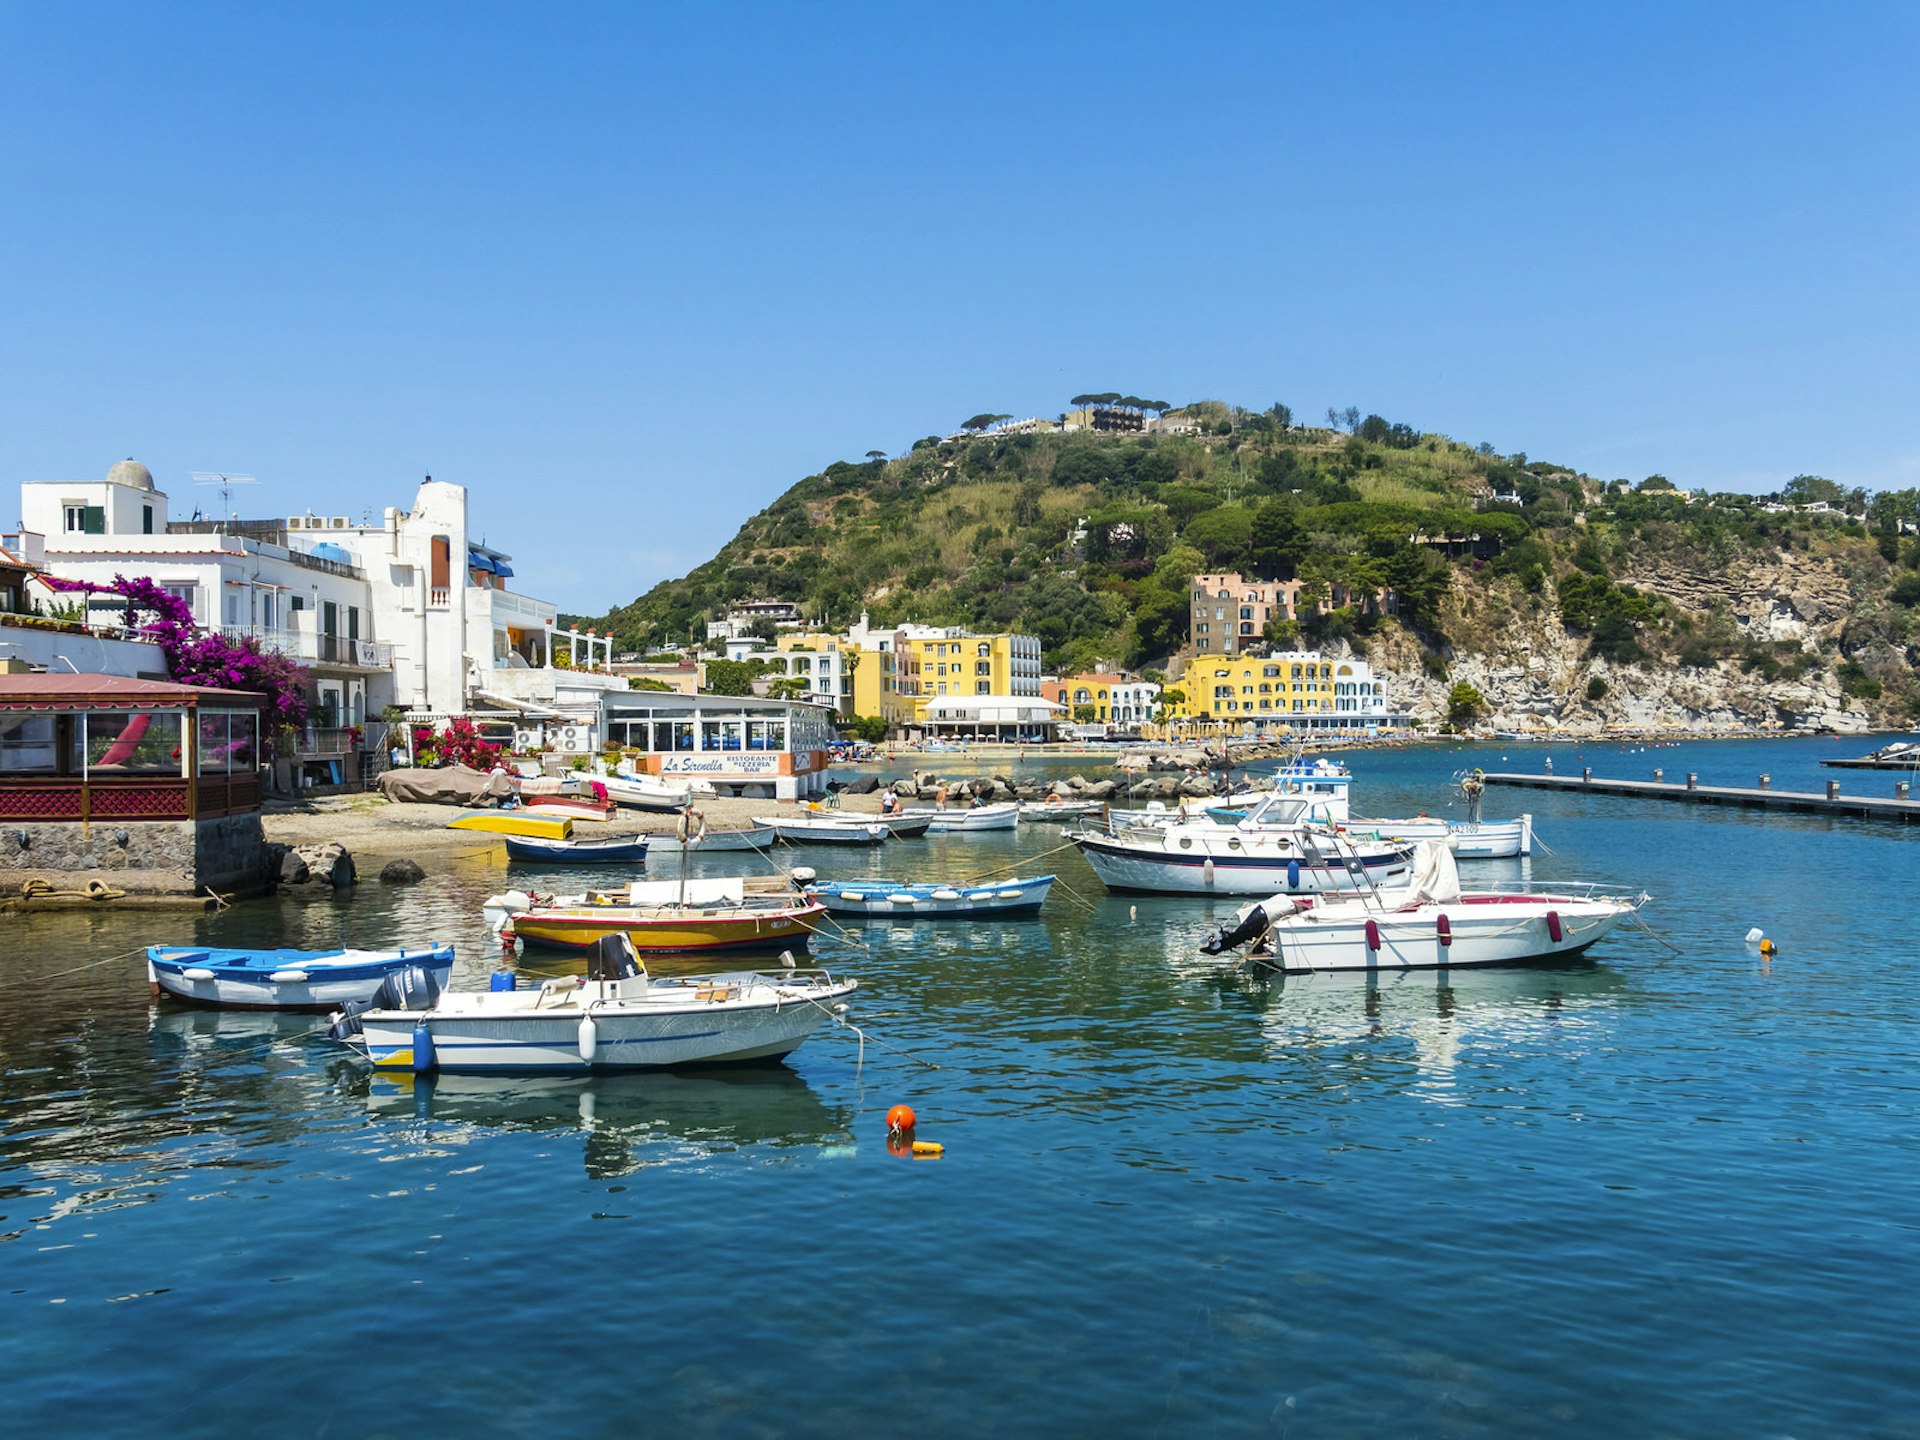 Several small boats moored along the coast of Ischia. There are restaurants and hotels in the background, nestled among hills and Mediterranean foliage.